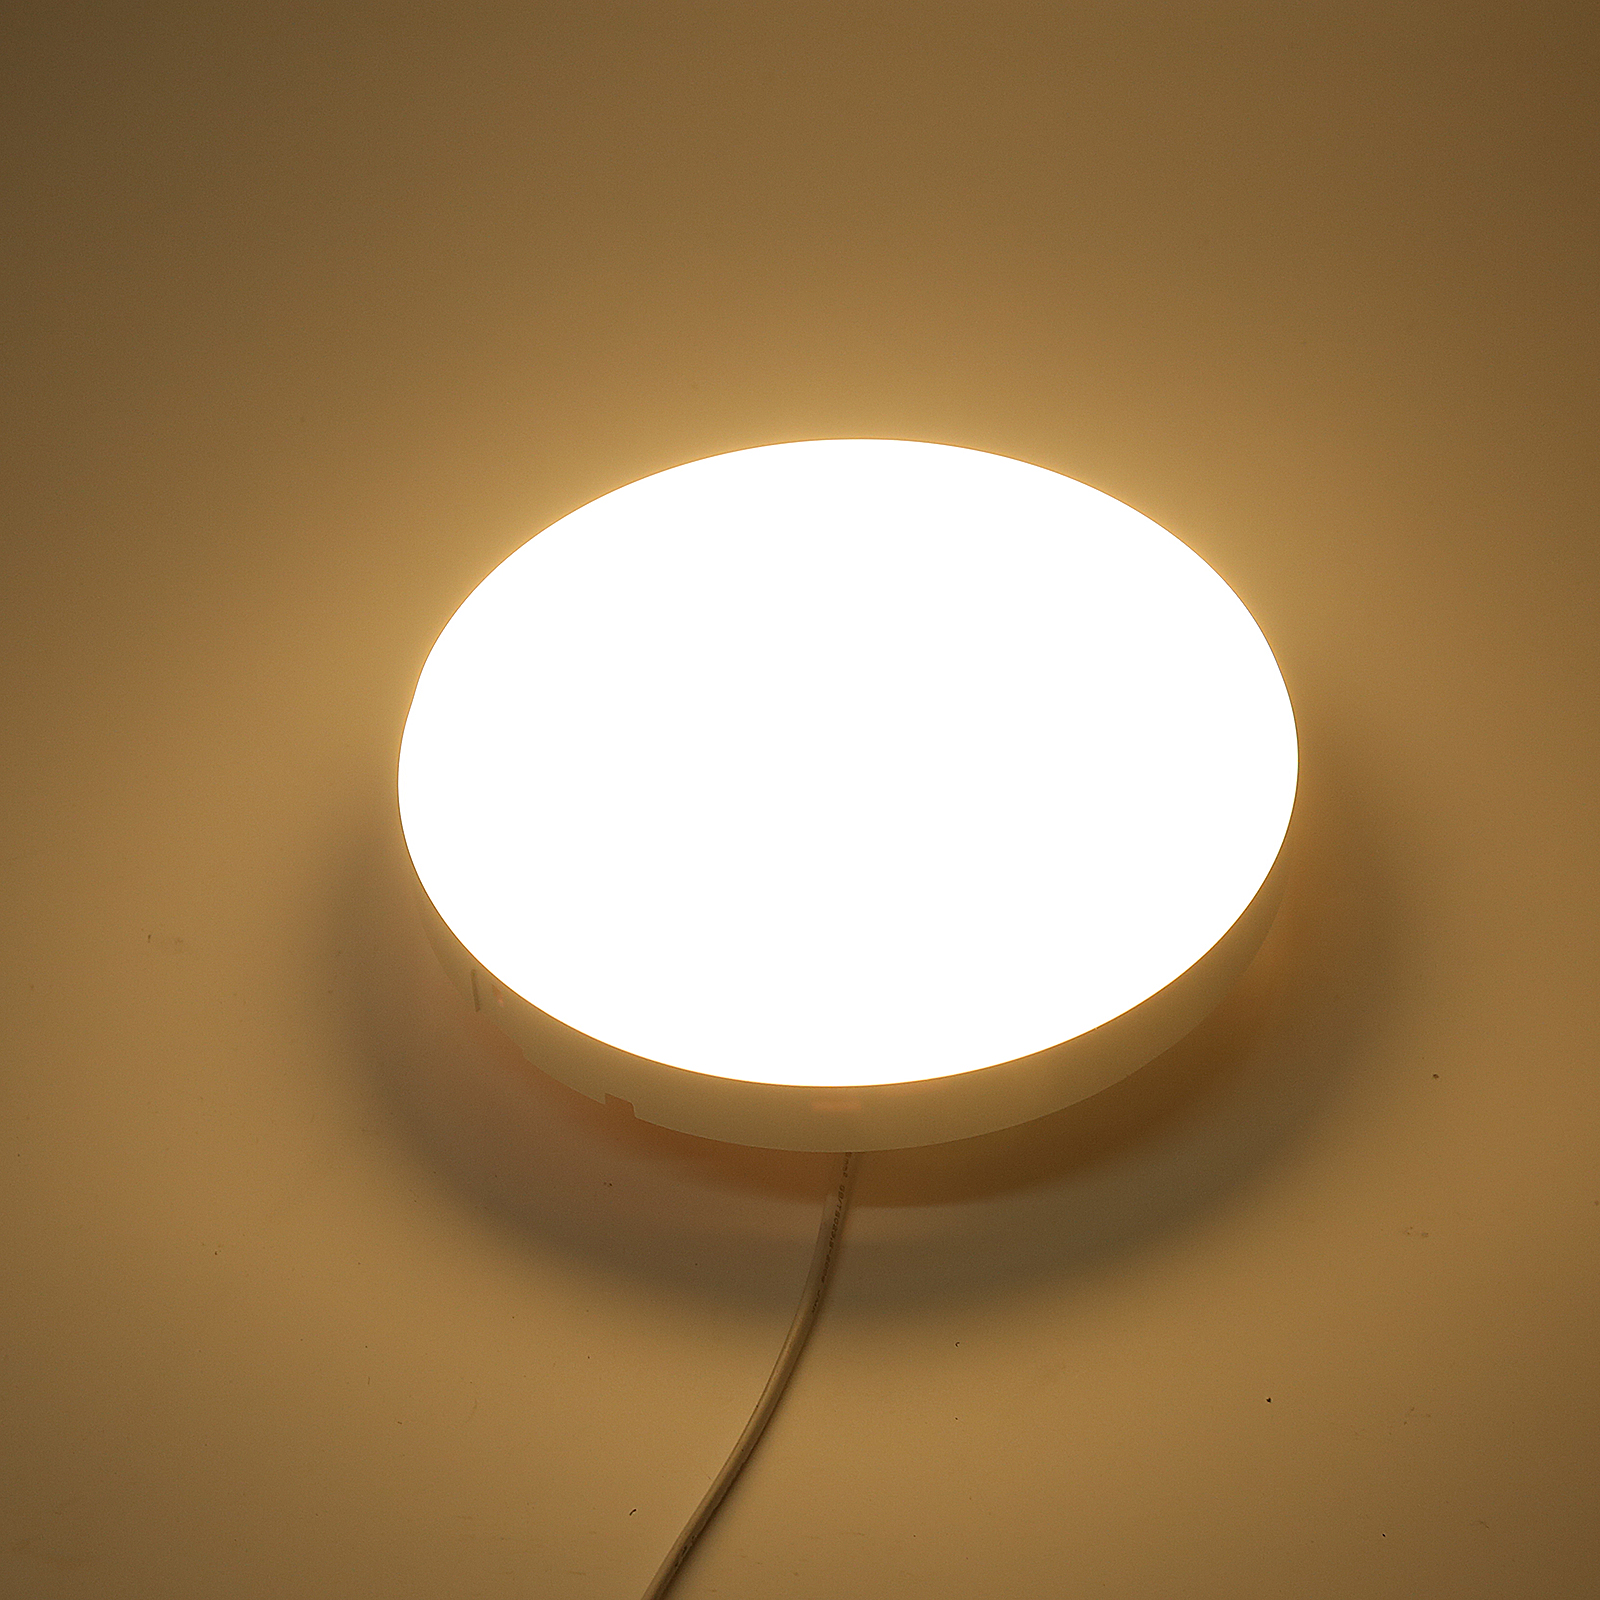 Find Elfeland 24W AC 160 265V LED Ceiling Lamp 3000K Warm White IP54 Waterproof with 32Pcs 2835 Lamp Beads for Sale on Gipsybee.com with cryptocurrencies